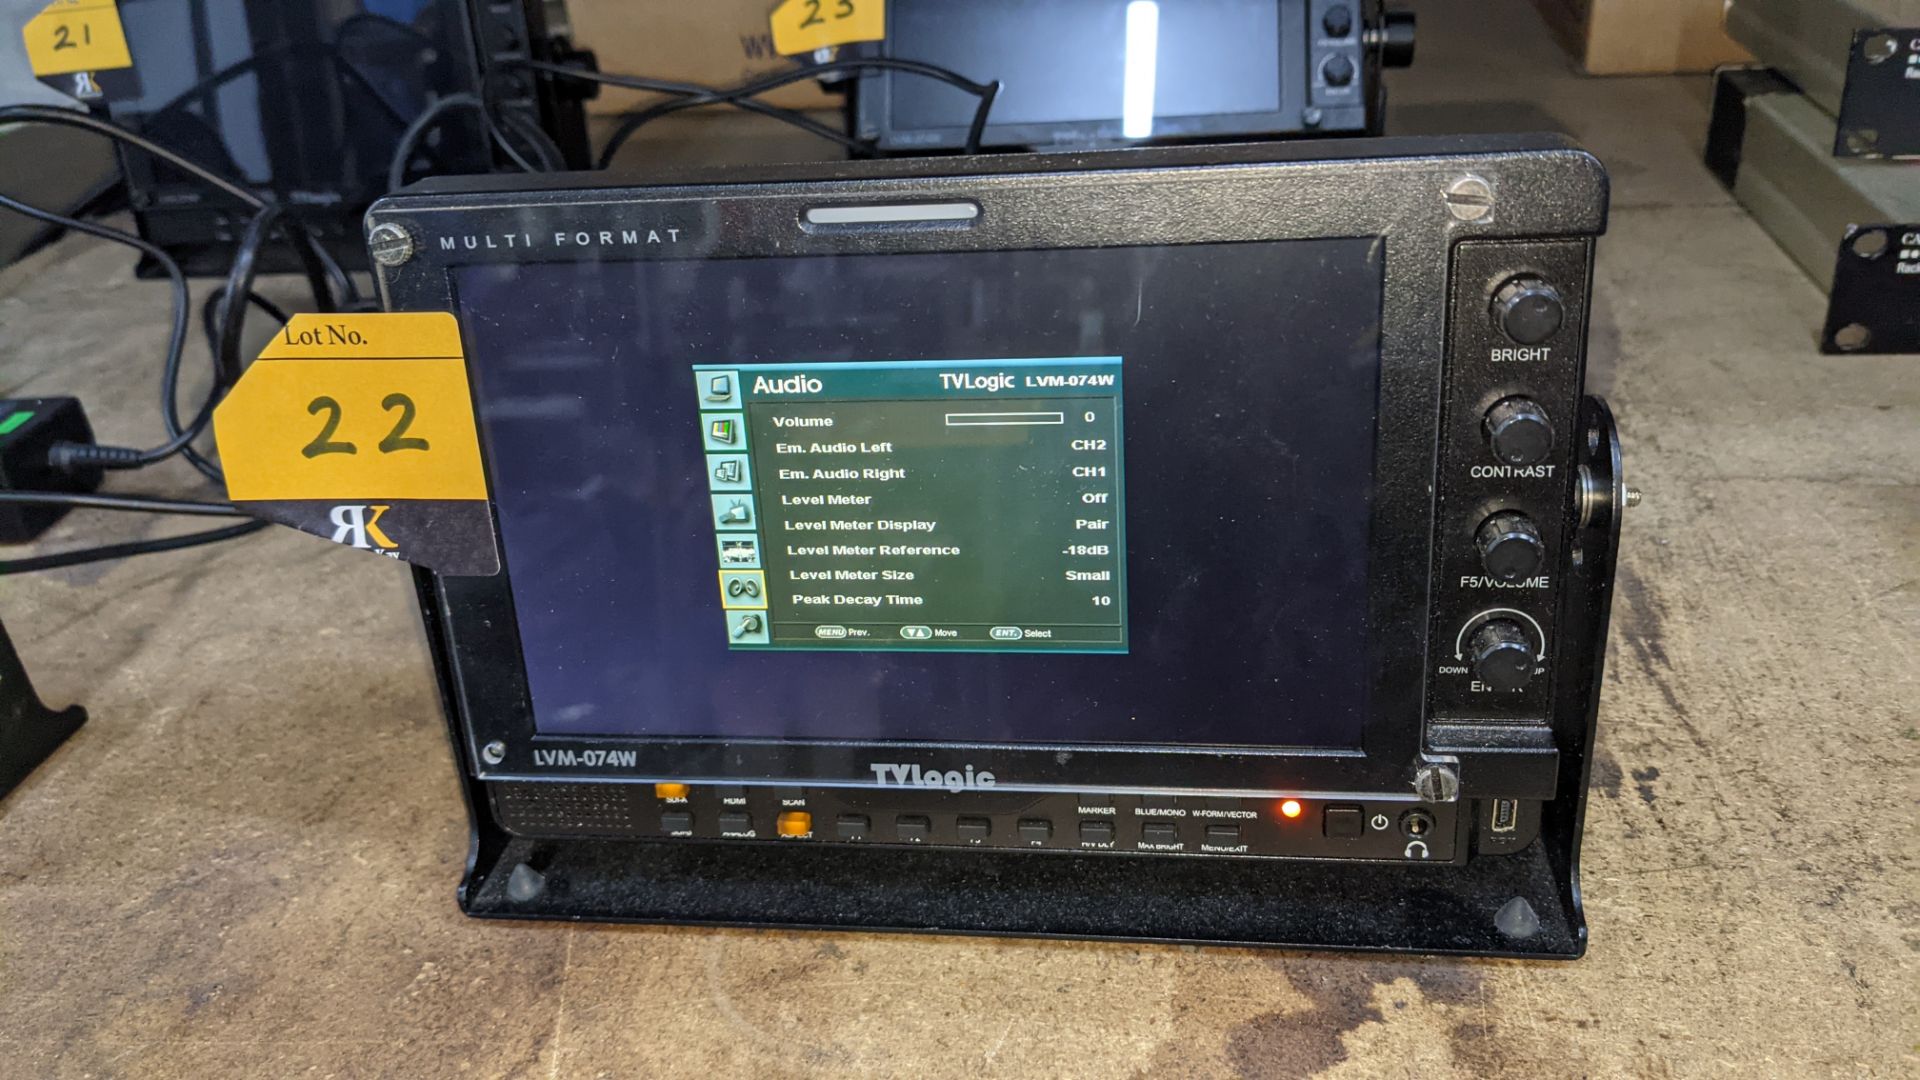 TVLogic multi format LCD monitor model LVM-074W, including hinged bracket & power supply - Image 6 of 12